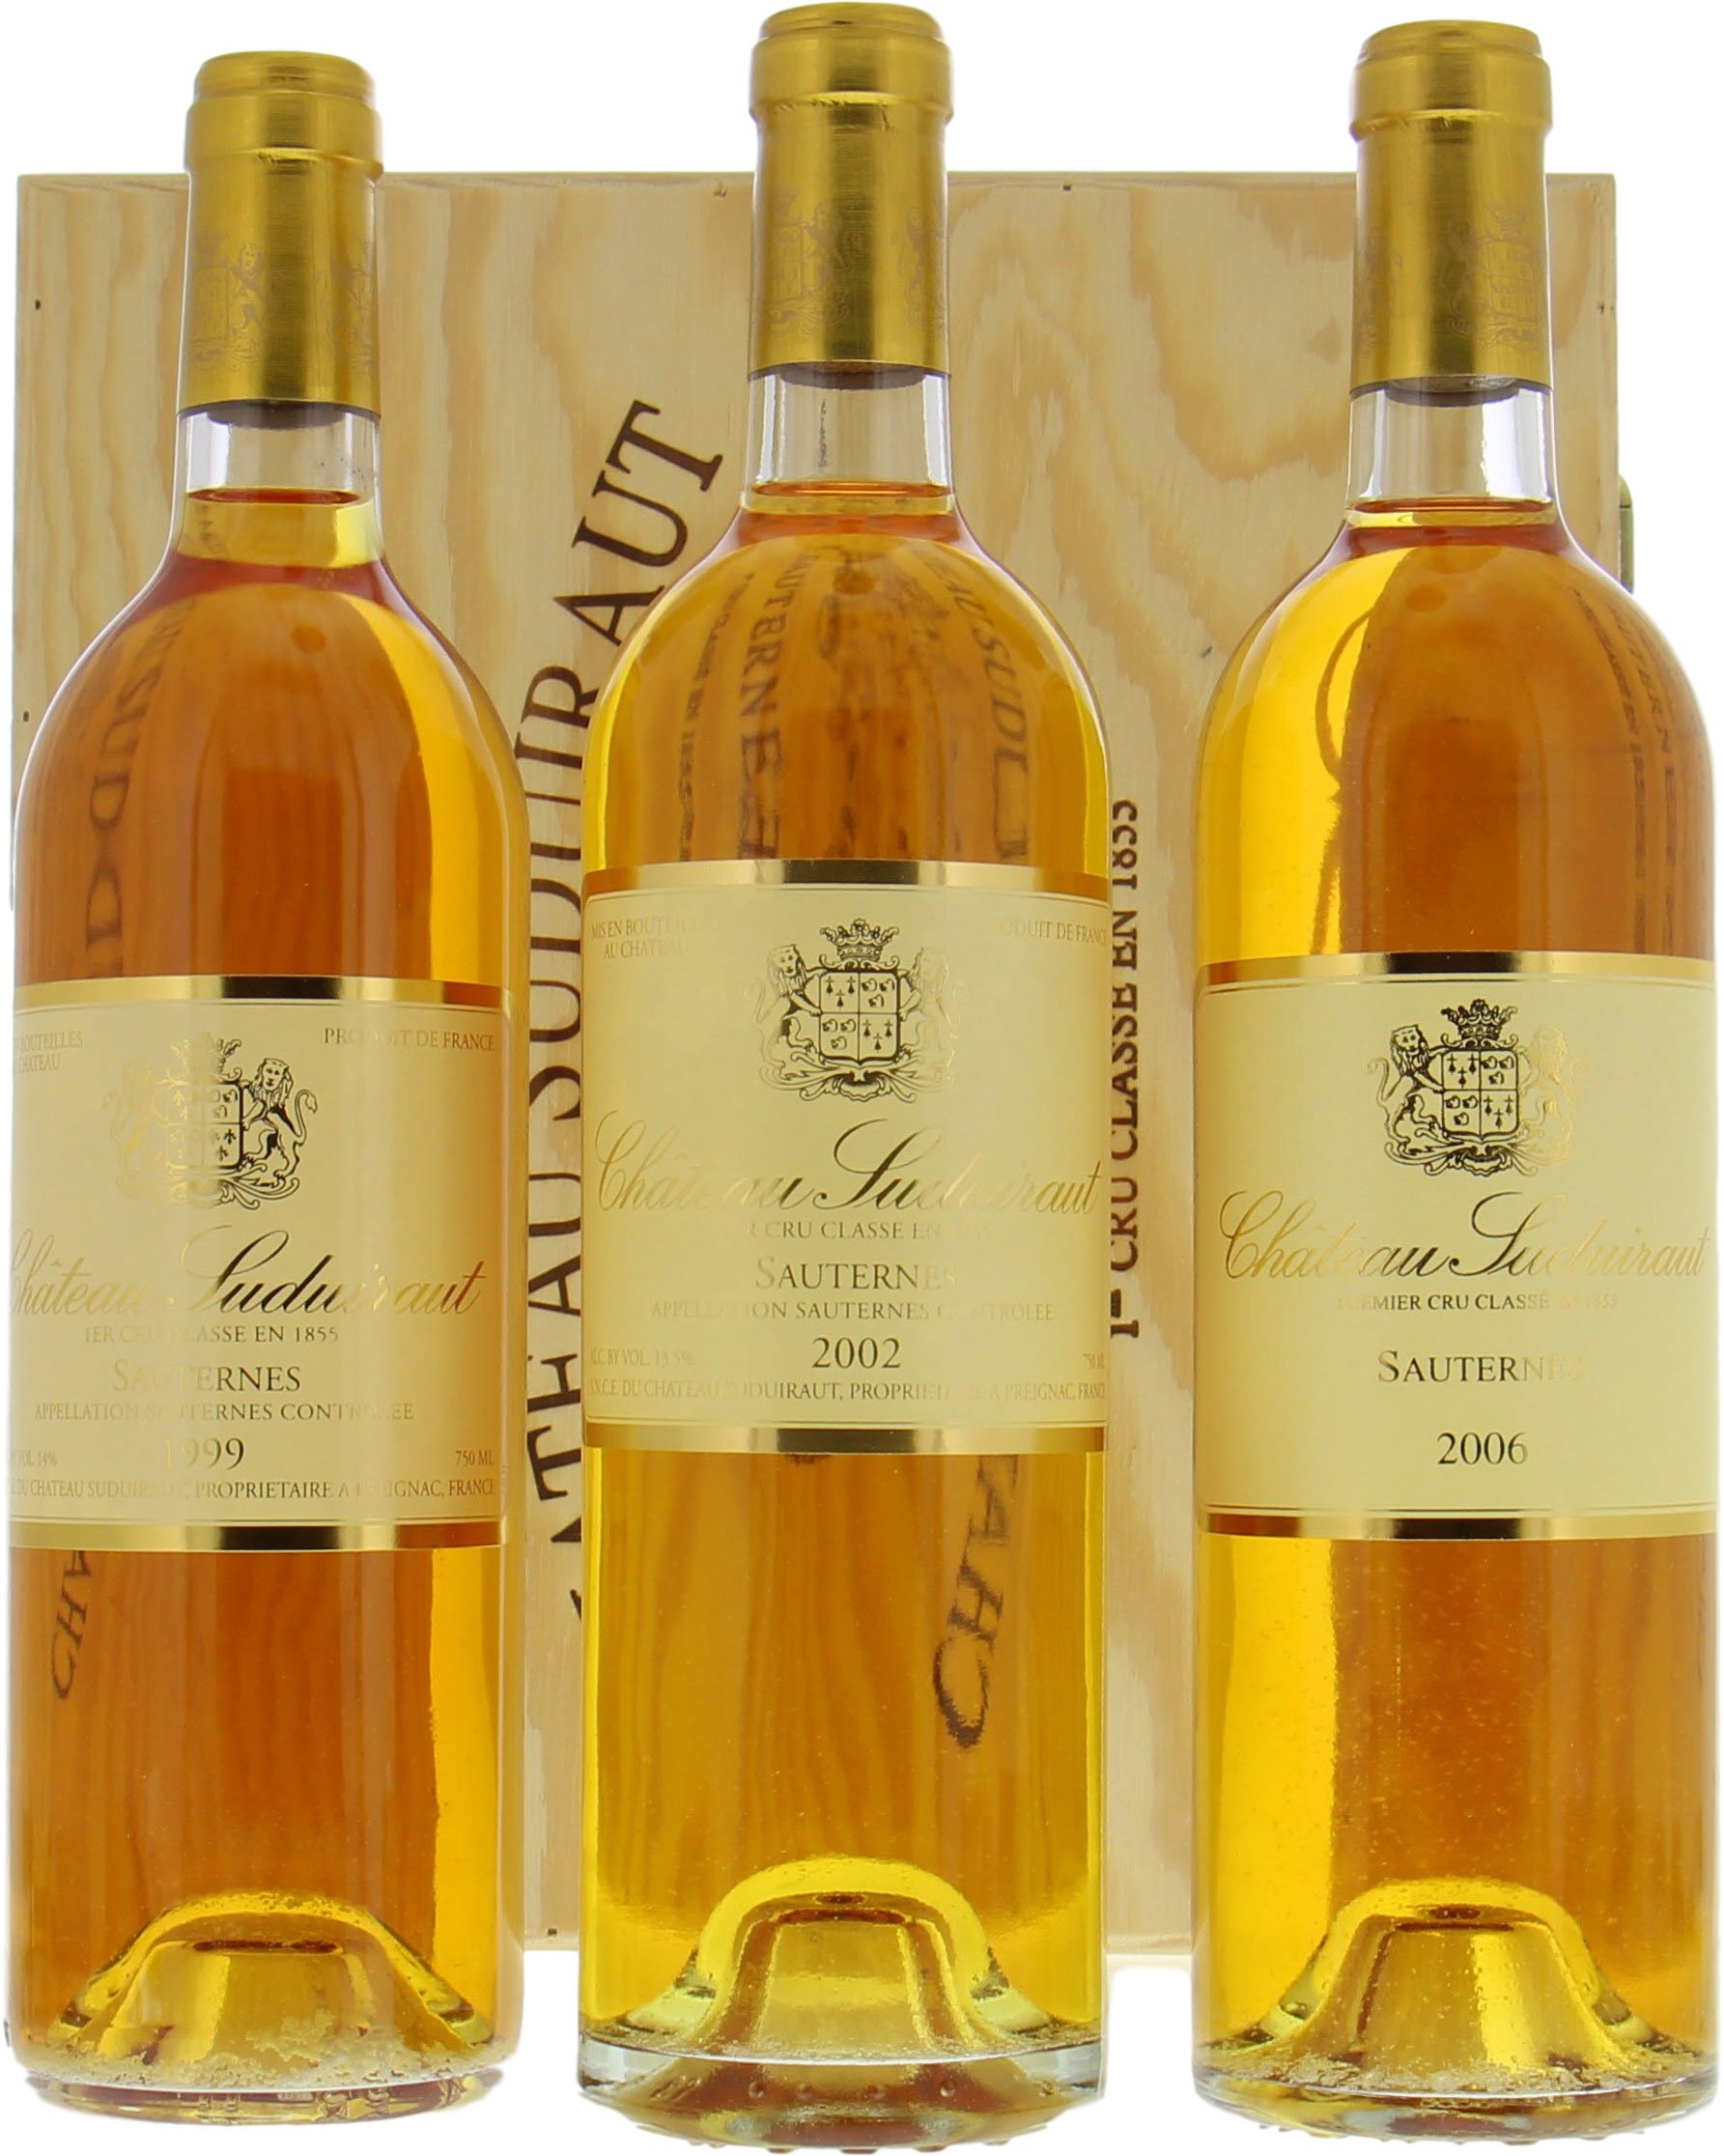 Chateau Suduiraut - The terroir - 1999, 2002, 2006 NV From Original Wooden Case